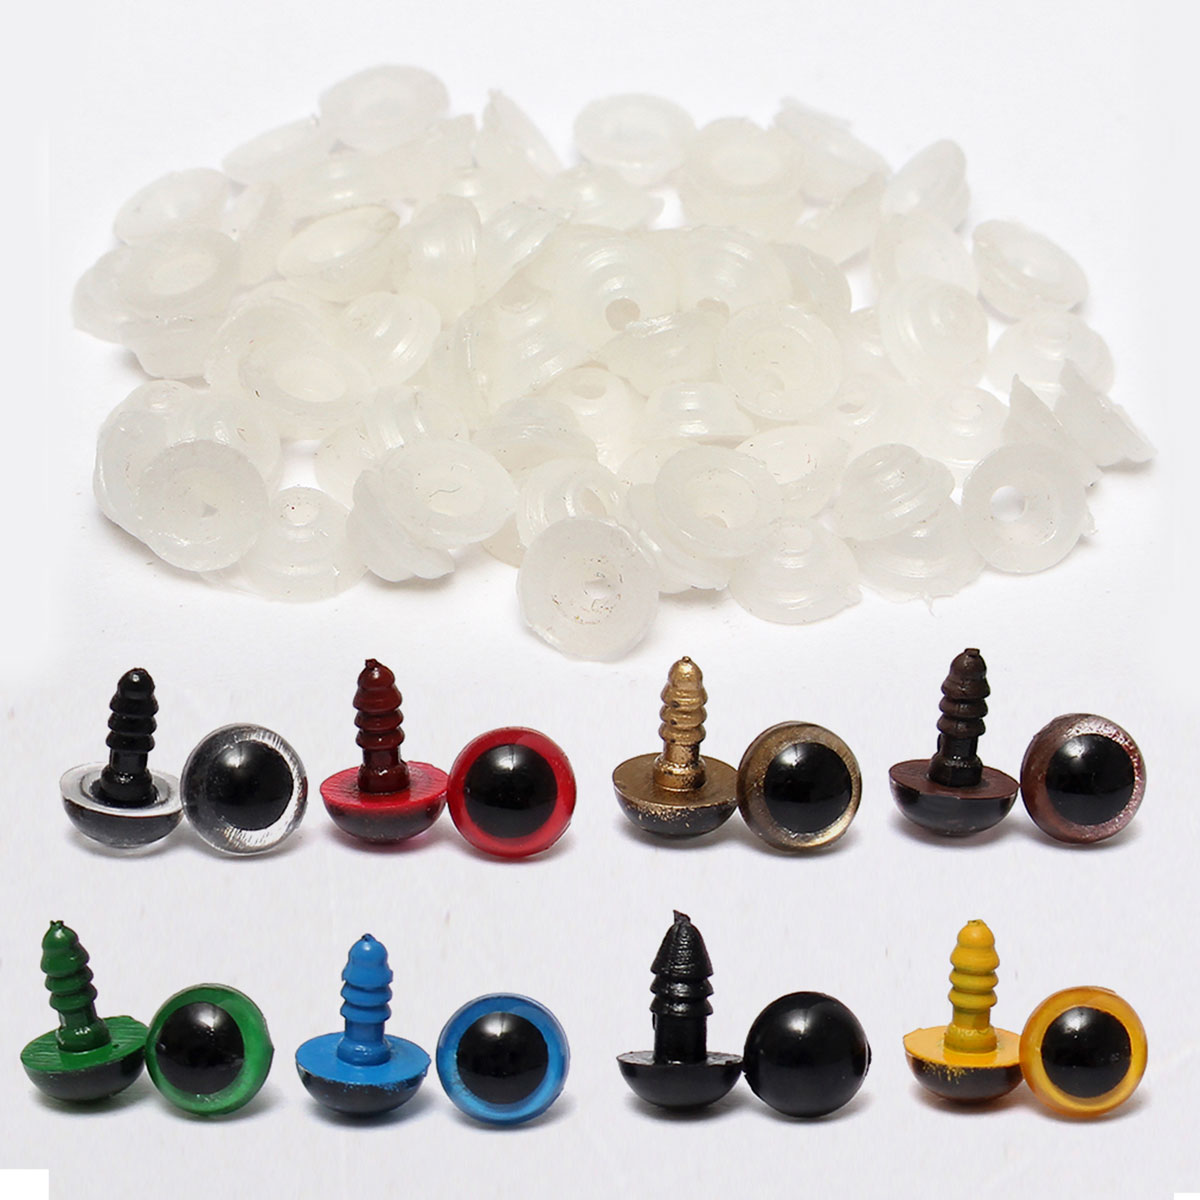 80Pcs 12mm Craft Plastic Colorful Safety Eyes for Teddy Bear Dolls Toy DIY Making Doll Accessories